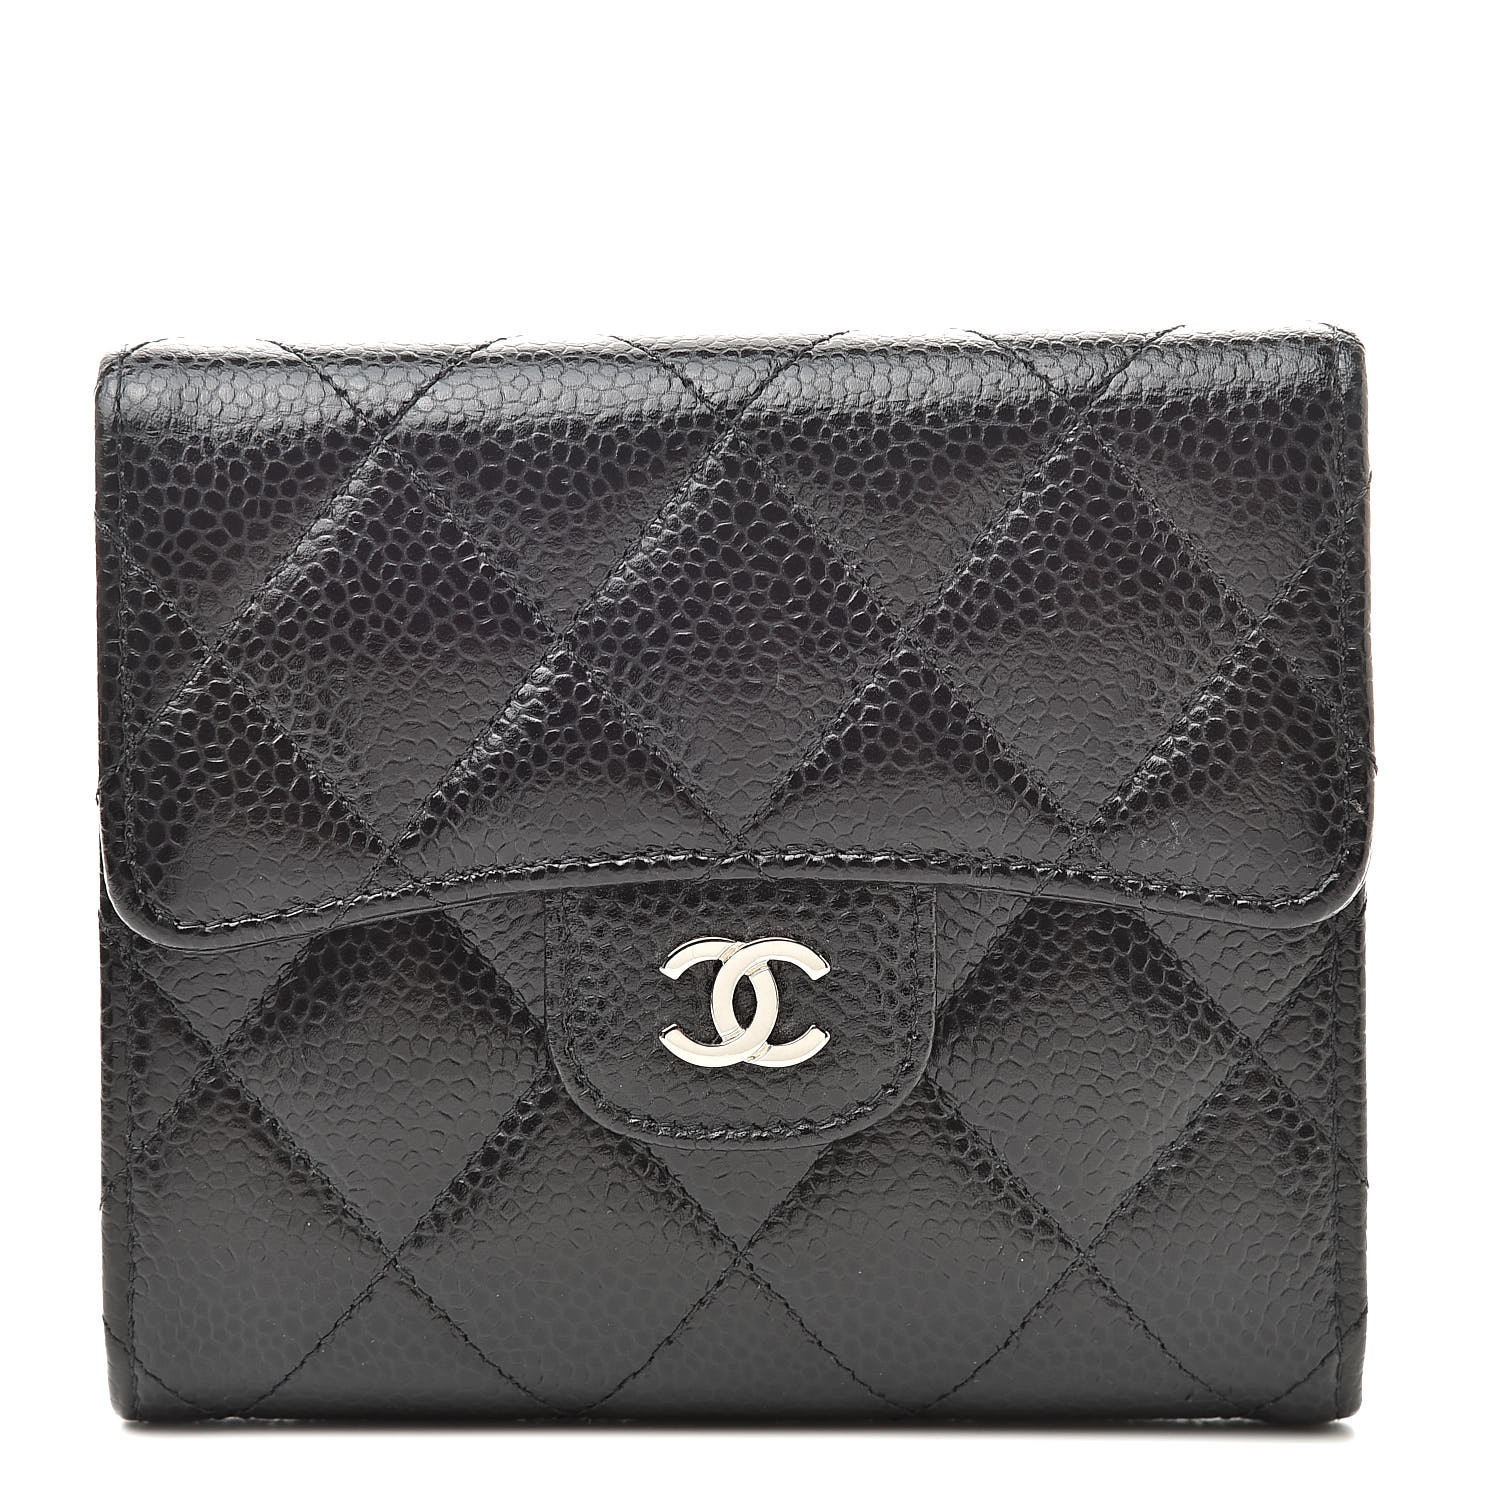 CHANEL Caviar Quilted Compact Flap Wallet Black 523738